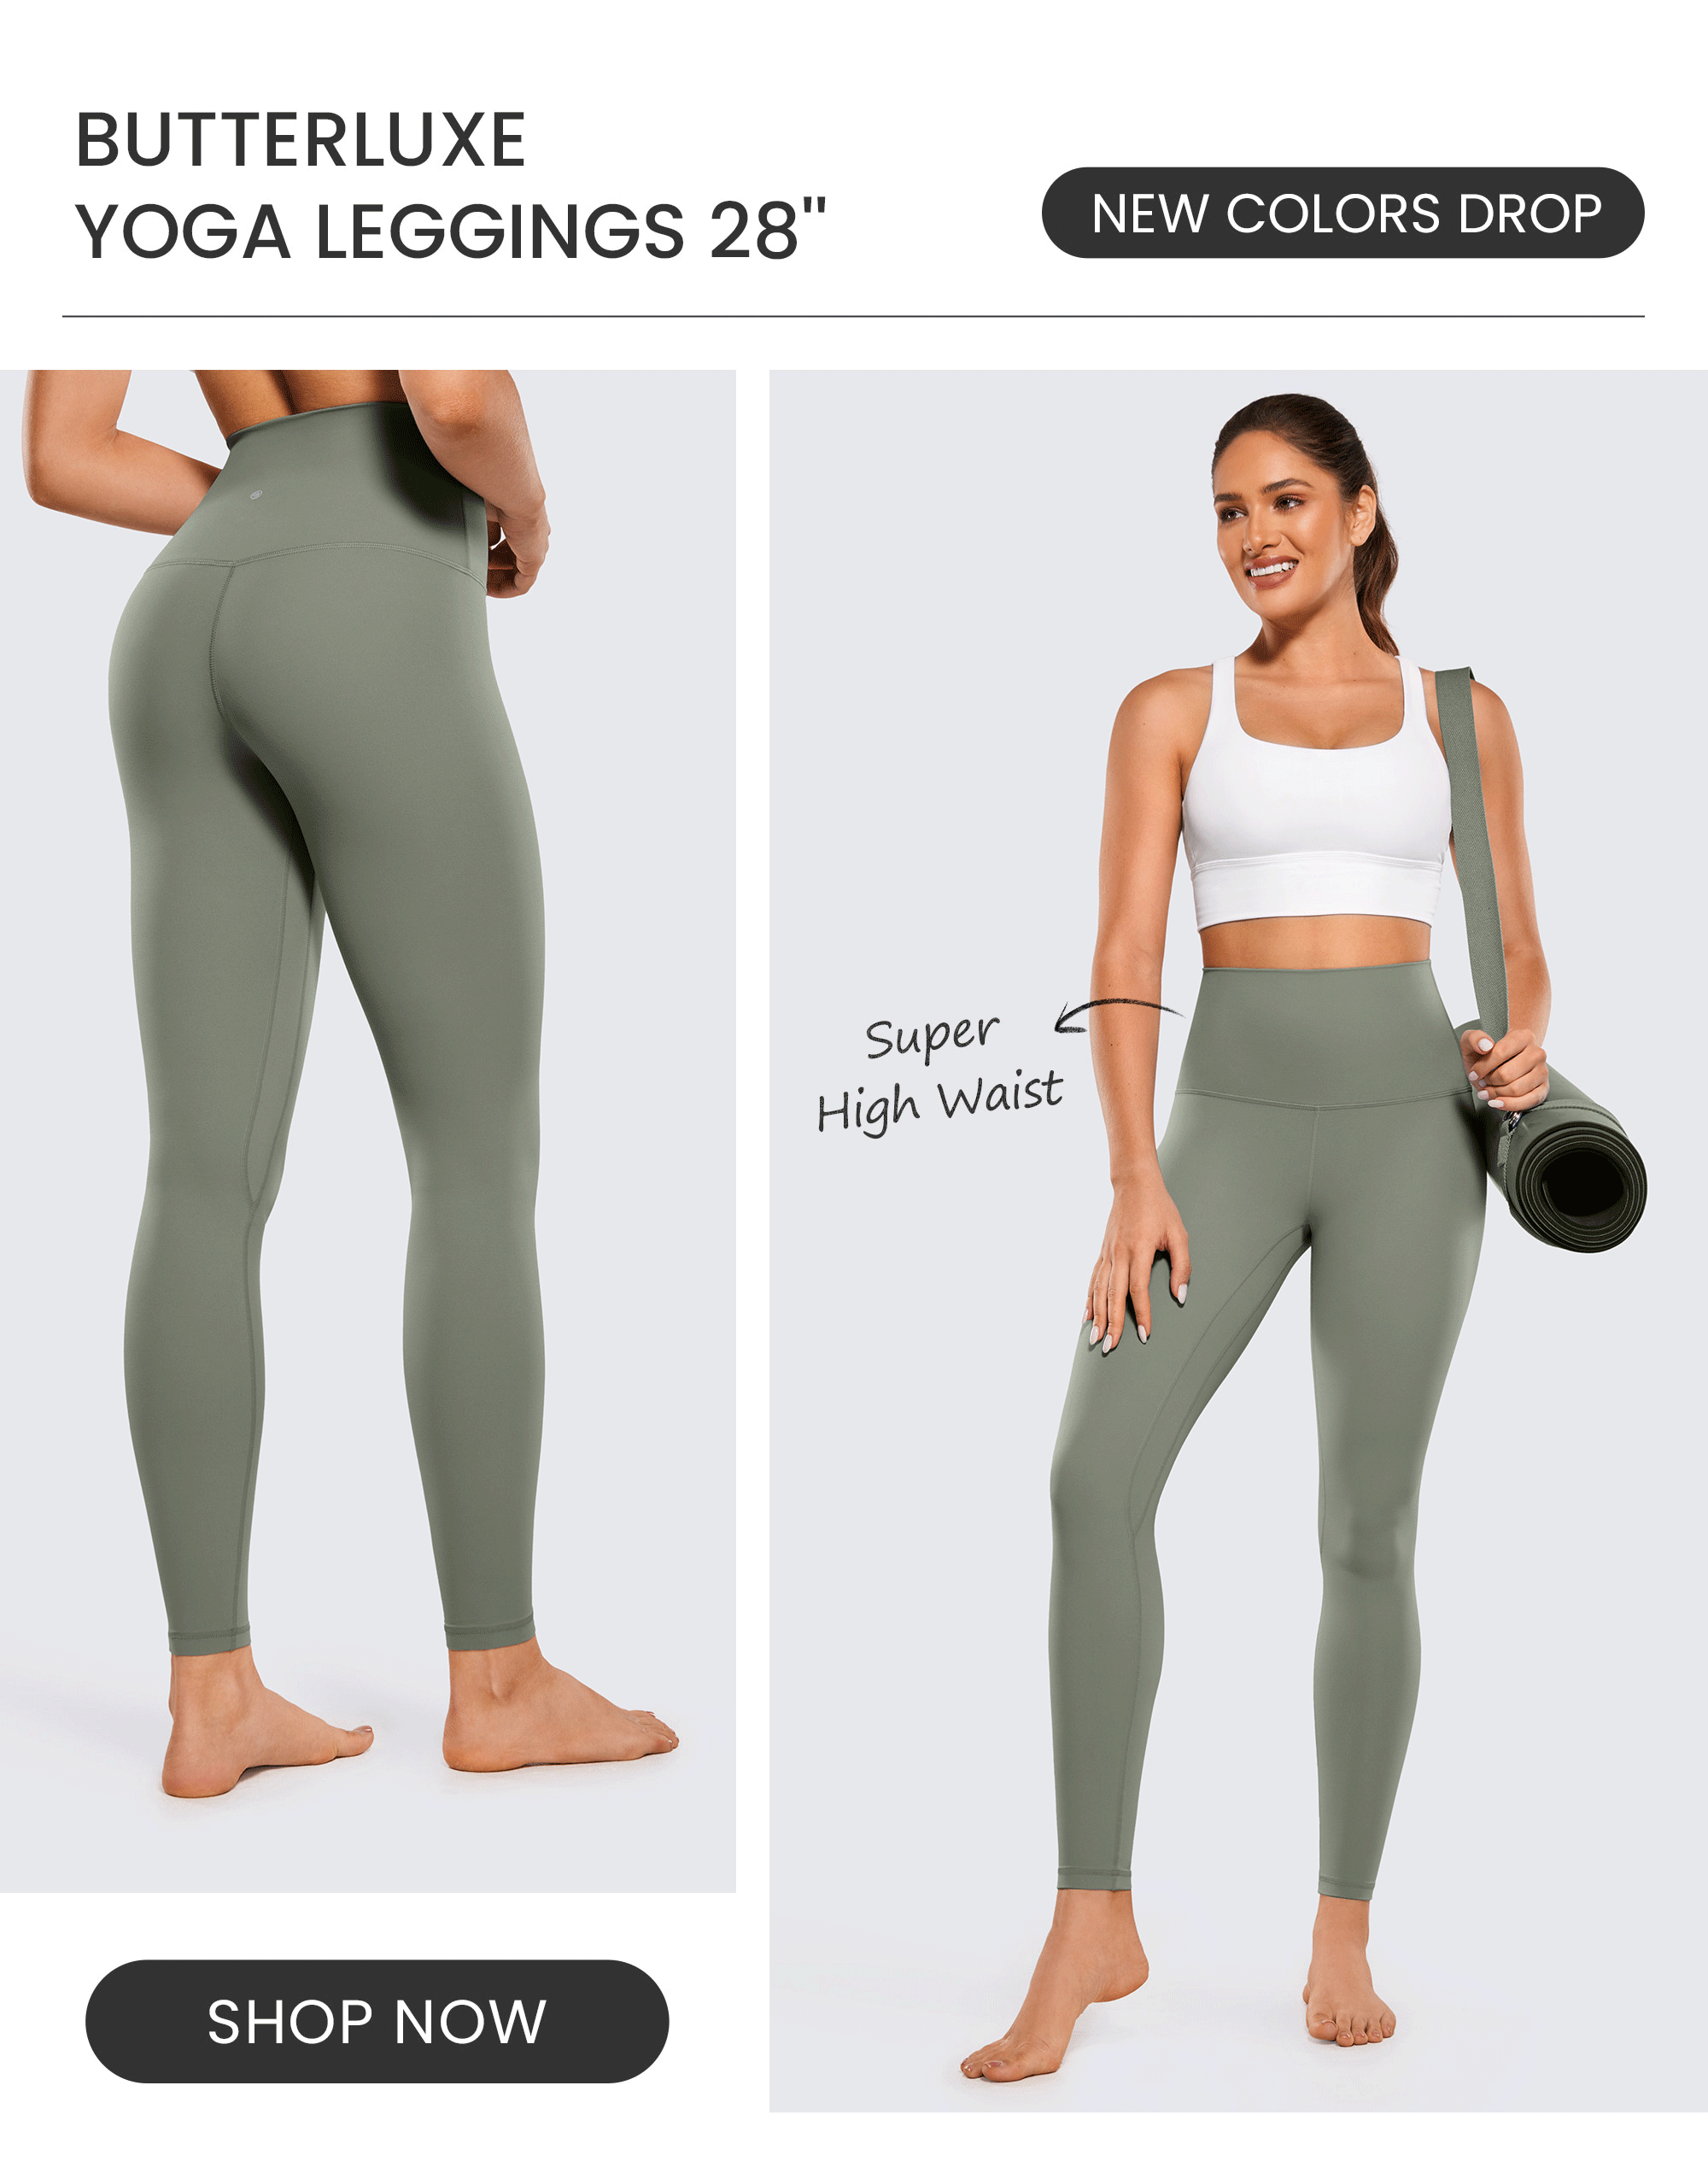 Step Up Fashion Game in 28 Inches Leggings - Crz Yoga